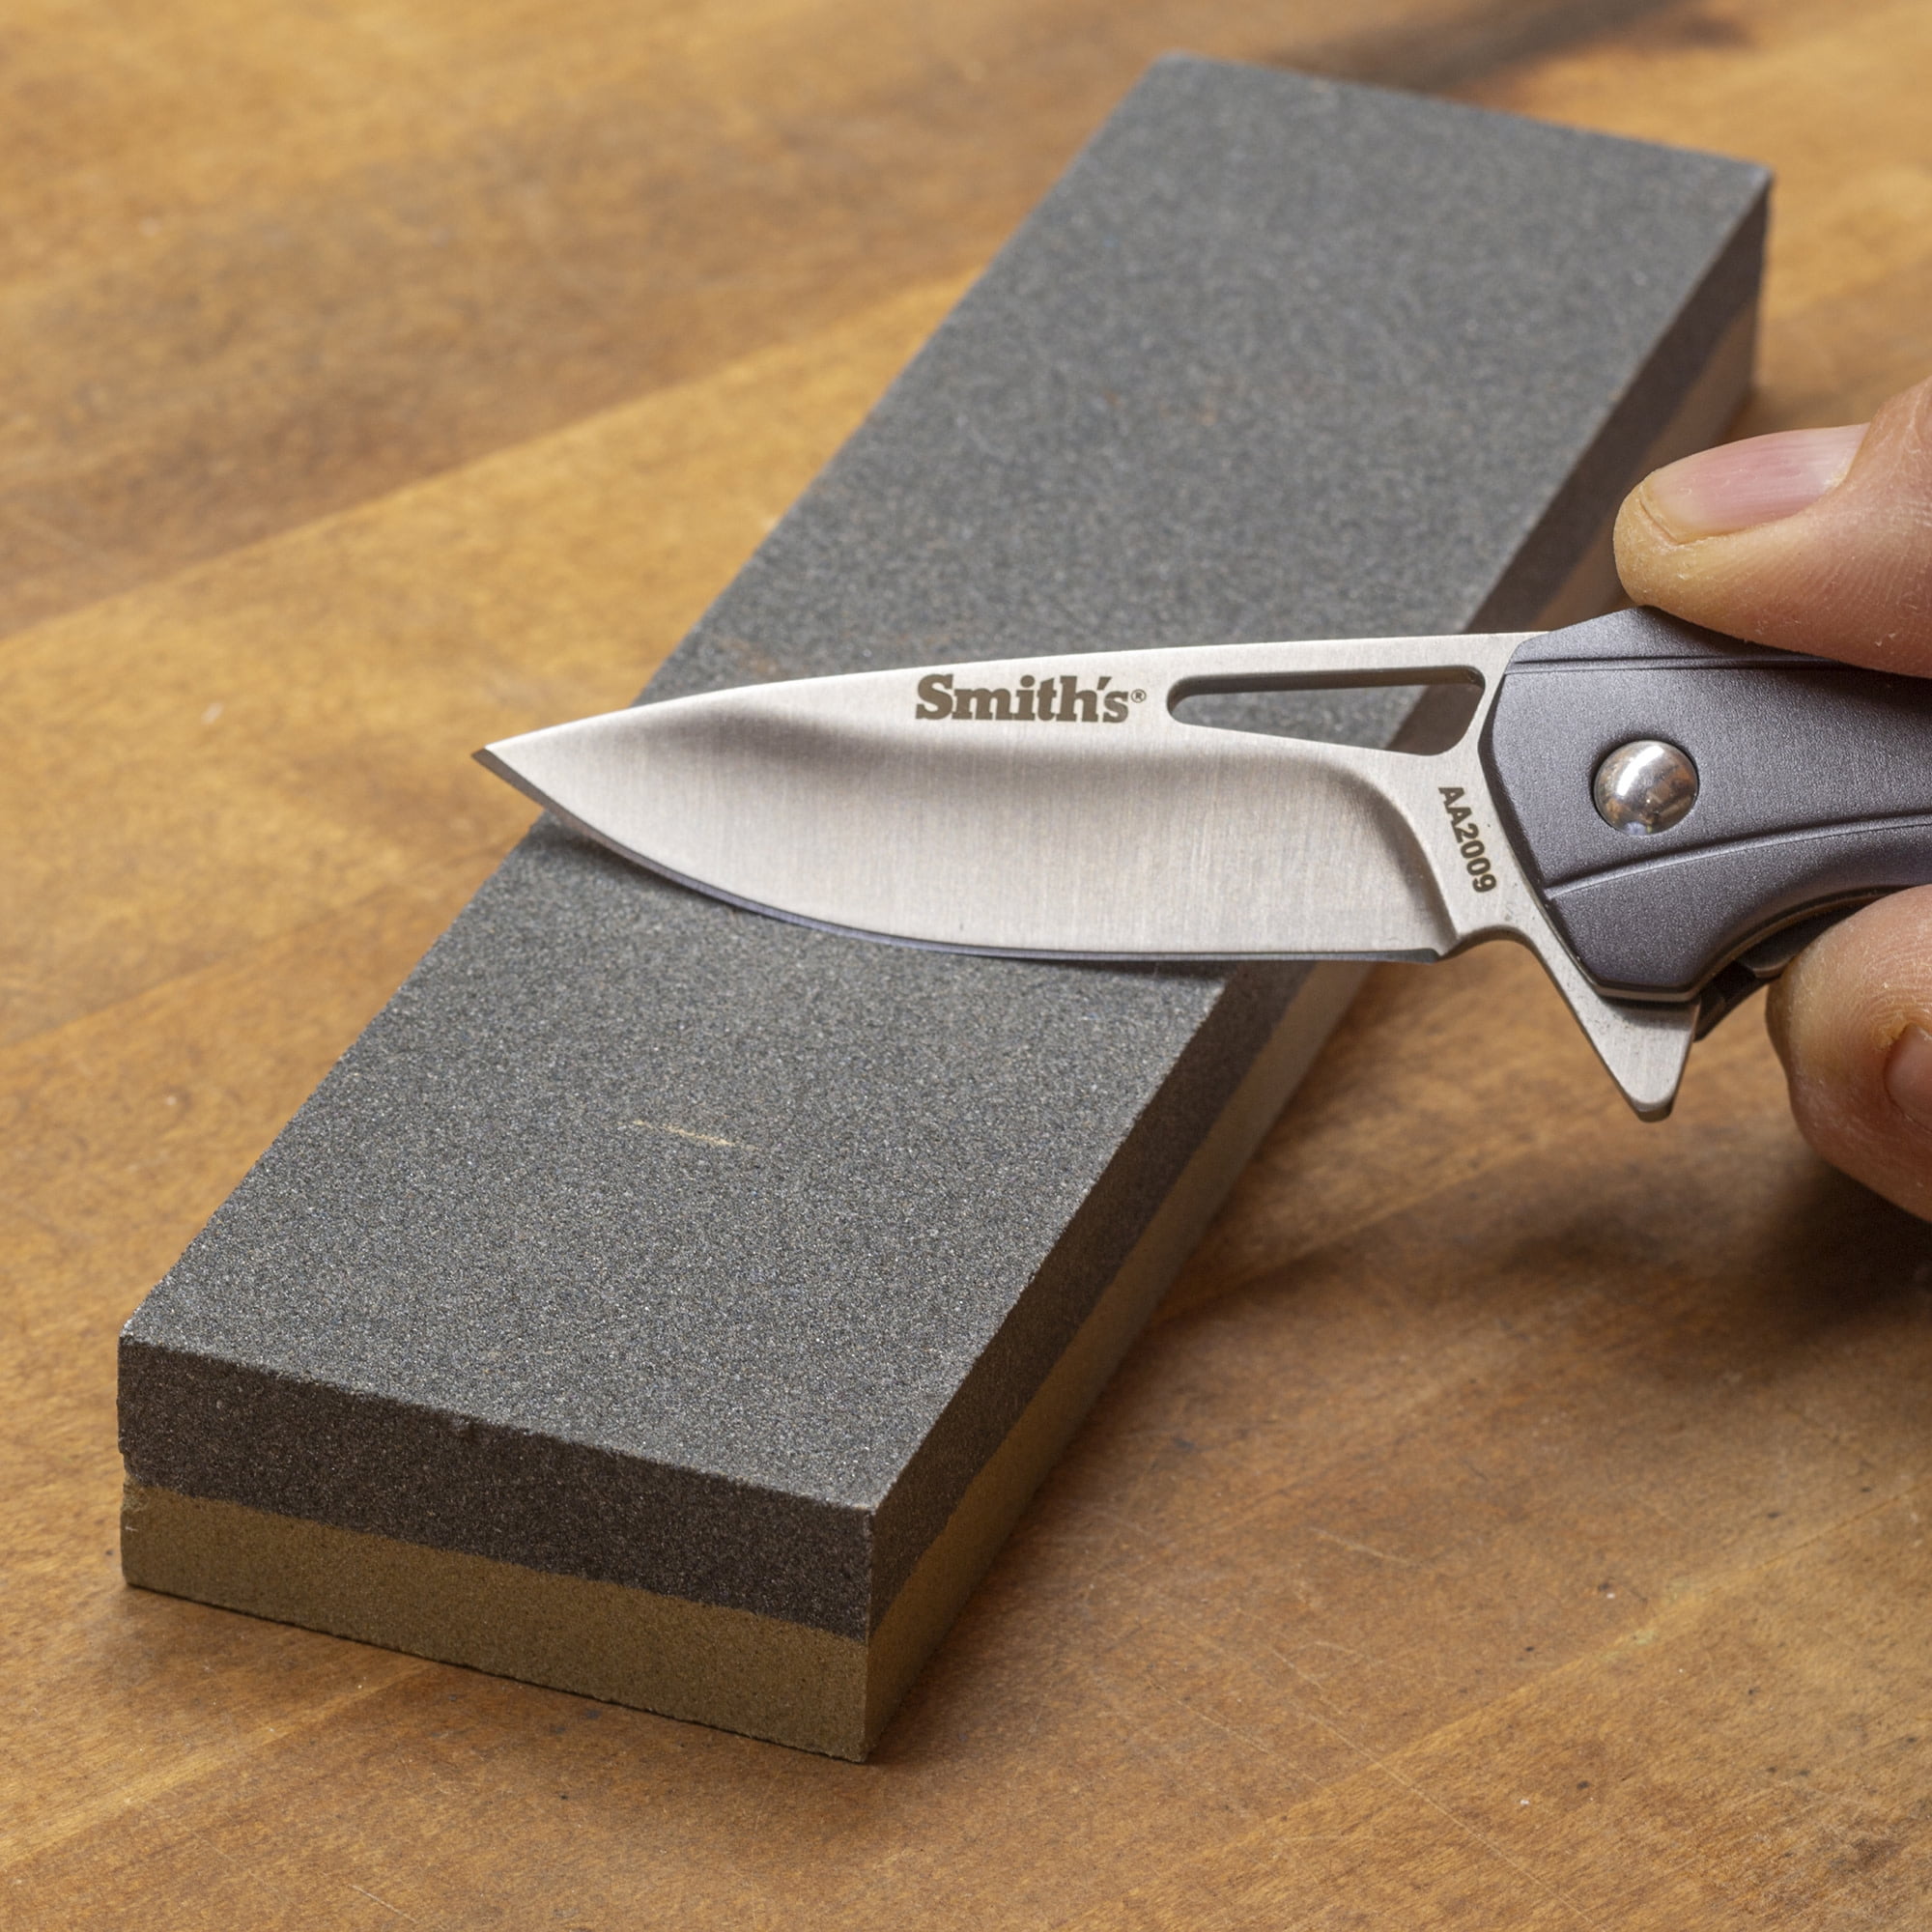 Smith's 50821 8” Dual Grit Combination Sharpening Stone – Gray – 8